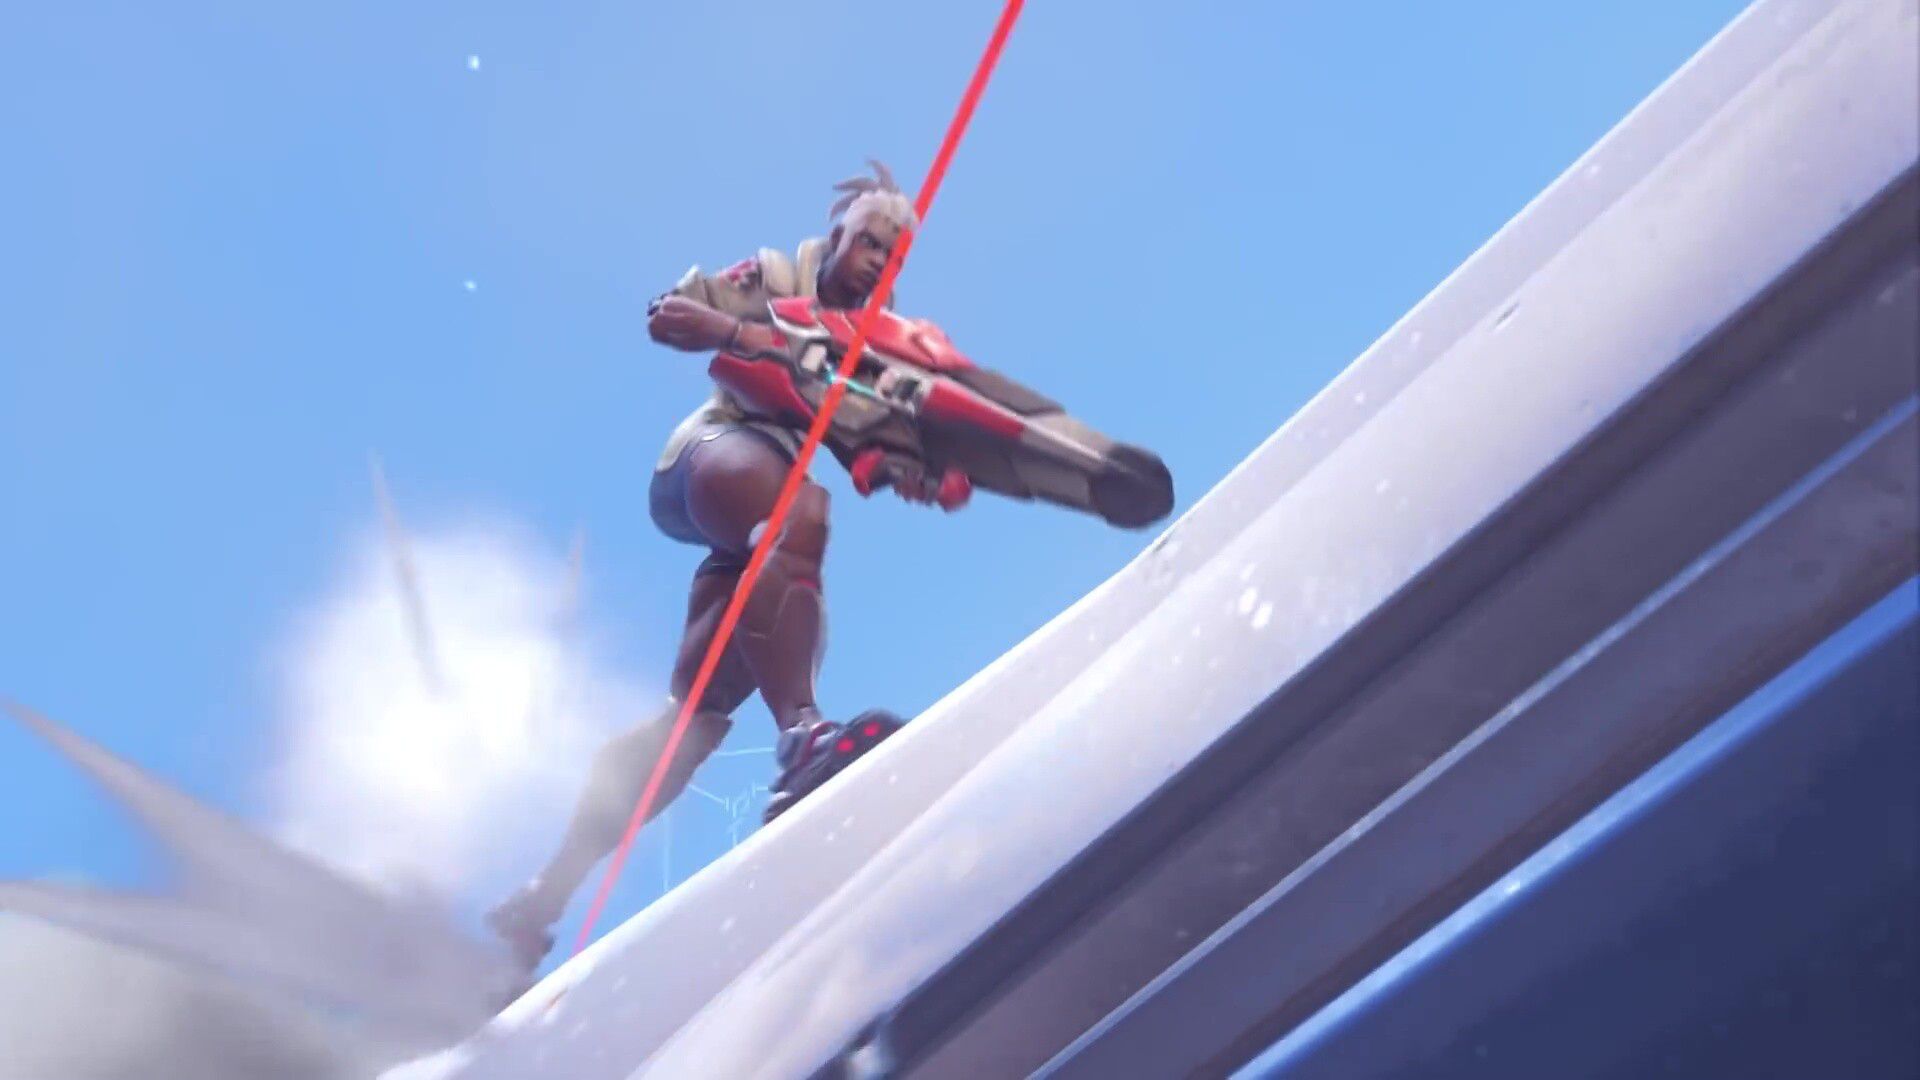 "Sojoan", a new character with a powerful rocket-equipped thigh with a whip whip of the Overwatch 2 machine 3